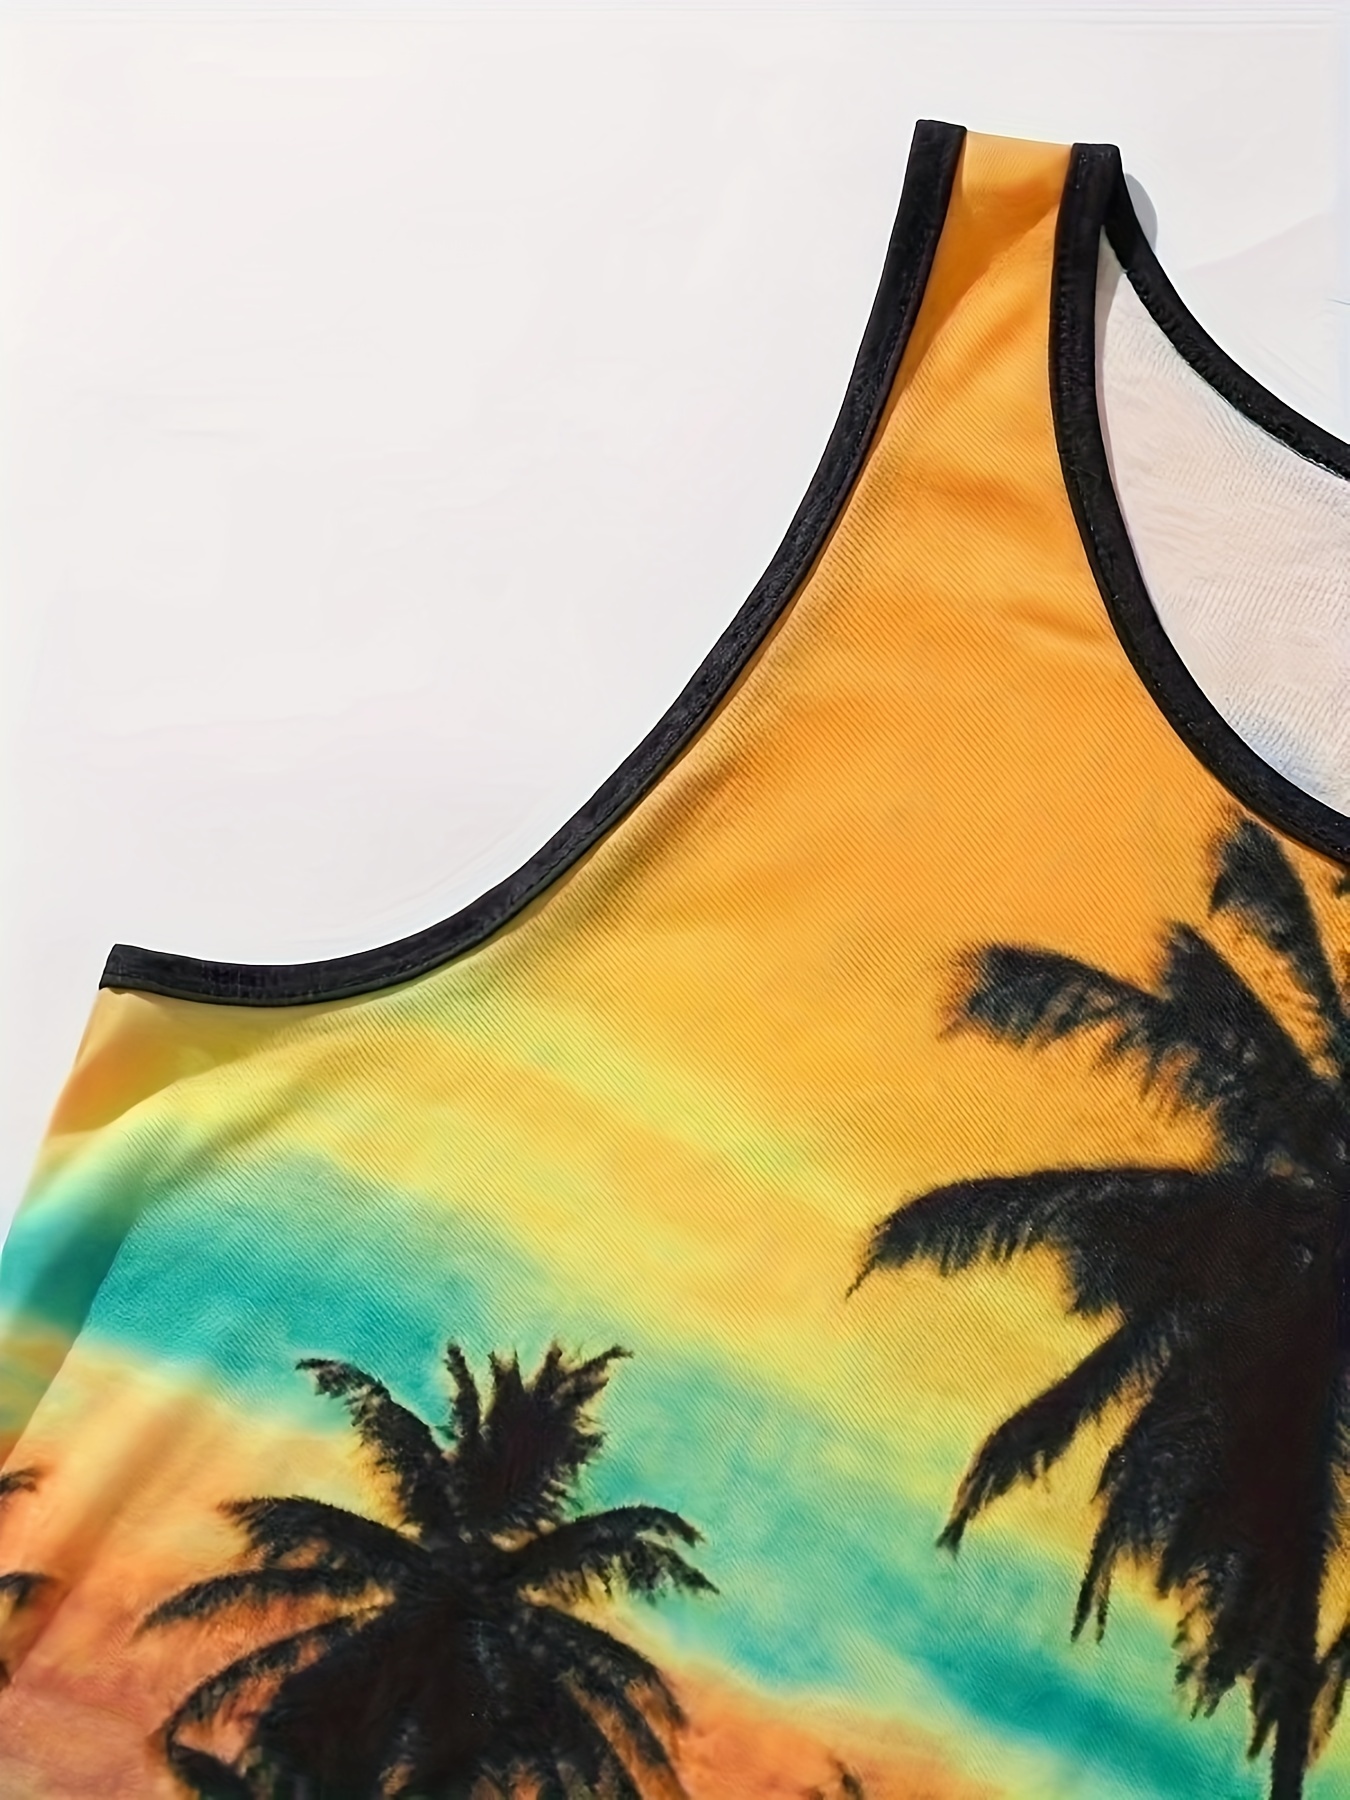 RYRJJ On Clearance Mens Funny Hawaii Tank Tops 3D Printed Palm Tree Graphic  Sleeveless Tee Shirts Summer Muscle Gym Workout T-Shirt Purple 6XL 